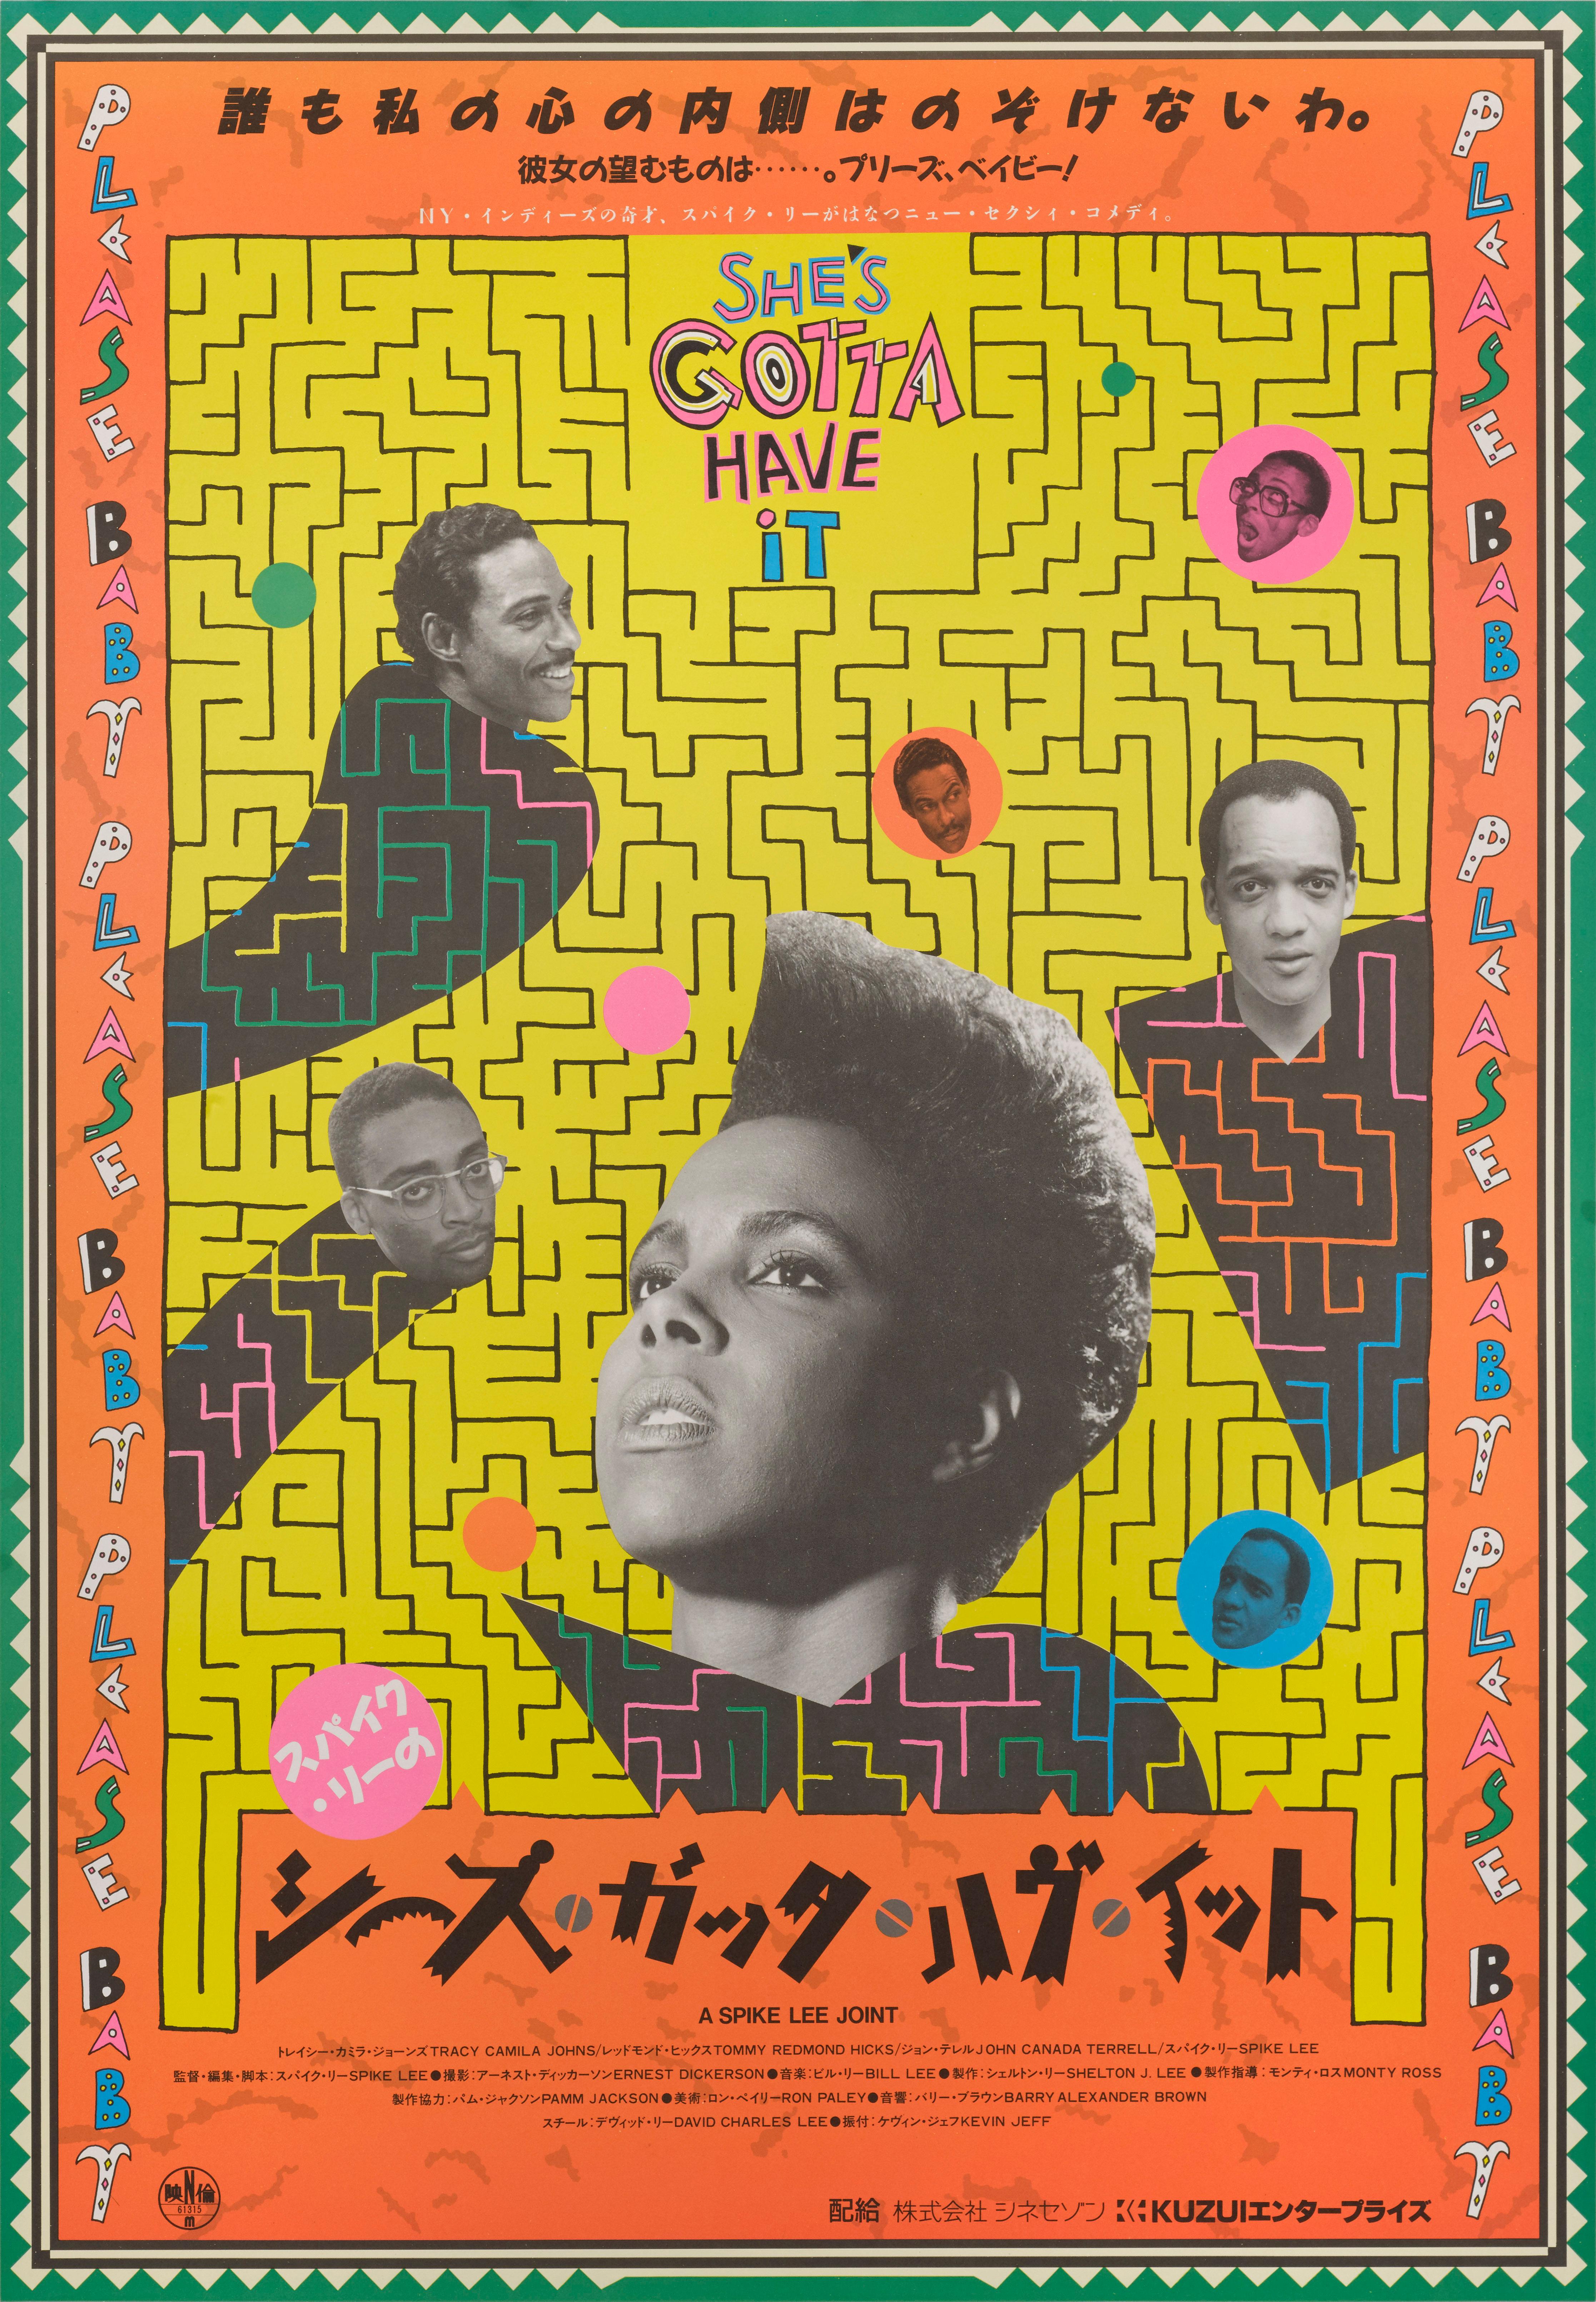 Original Japanese film film poster for She's Gotta Have It 1986
This film was Spike Lee's first feature-length film, after his thesis film for NYU graduate school, and launched his career. It was written, produced, directed and edited by Lee, and